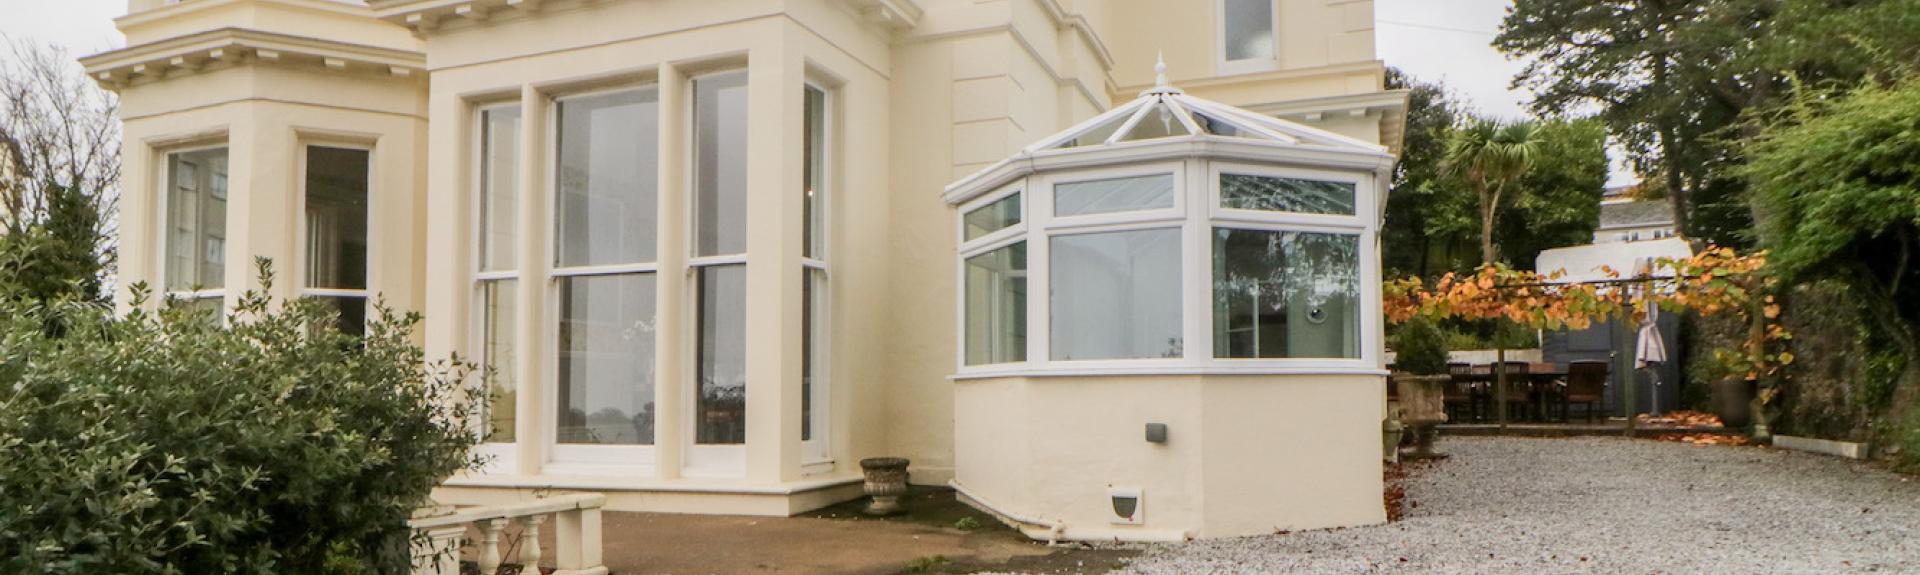 An exterior of s Victorian holiday villa in Torquay with ample car parking space in front.